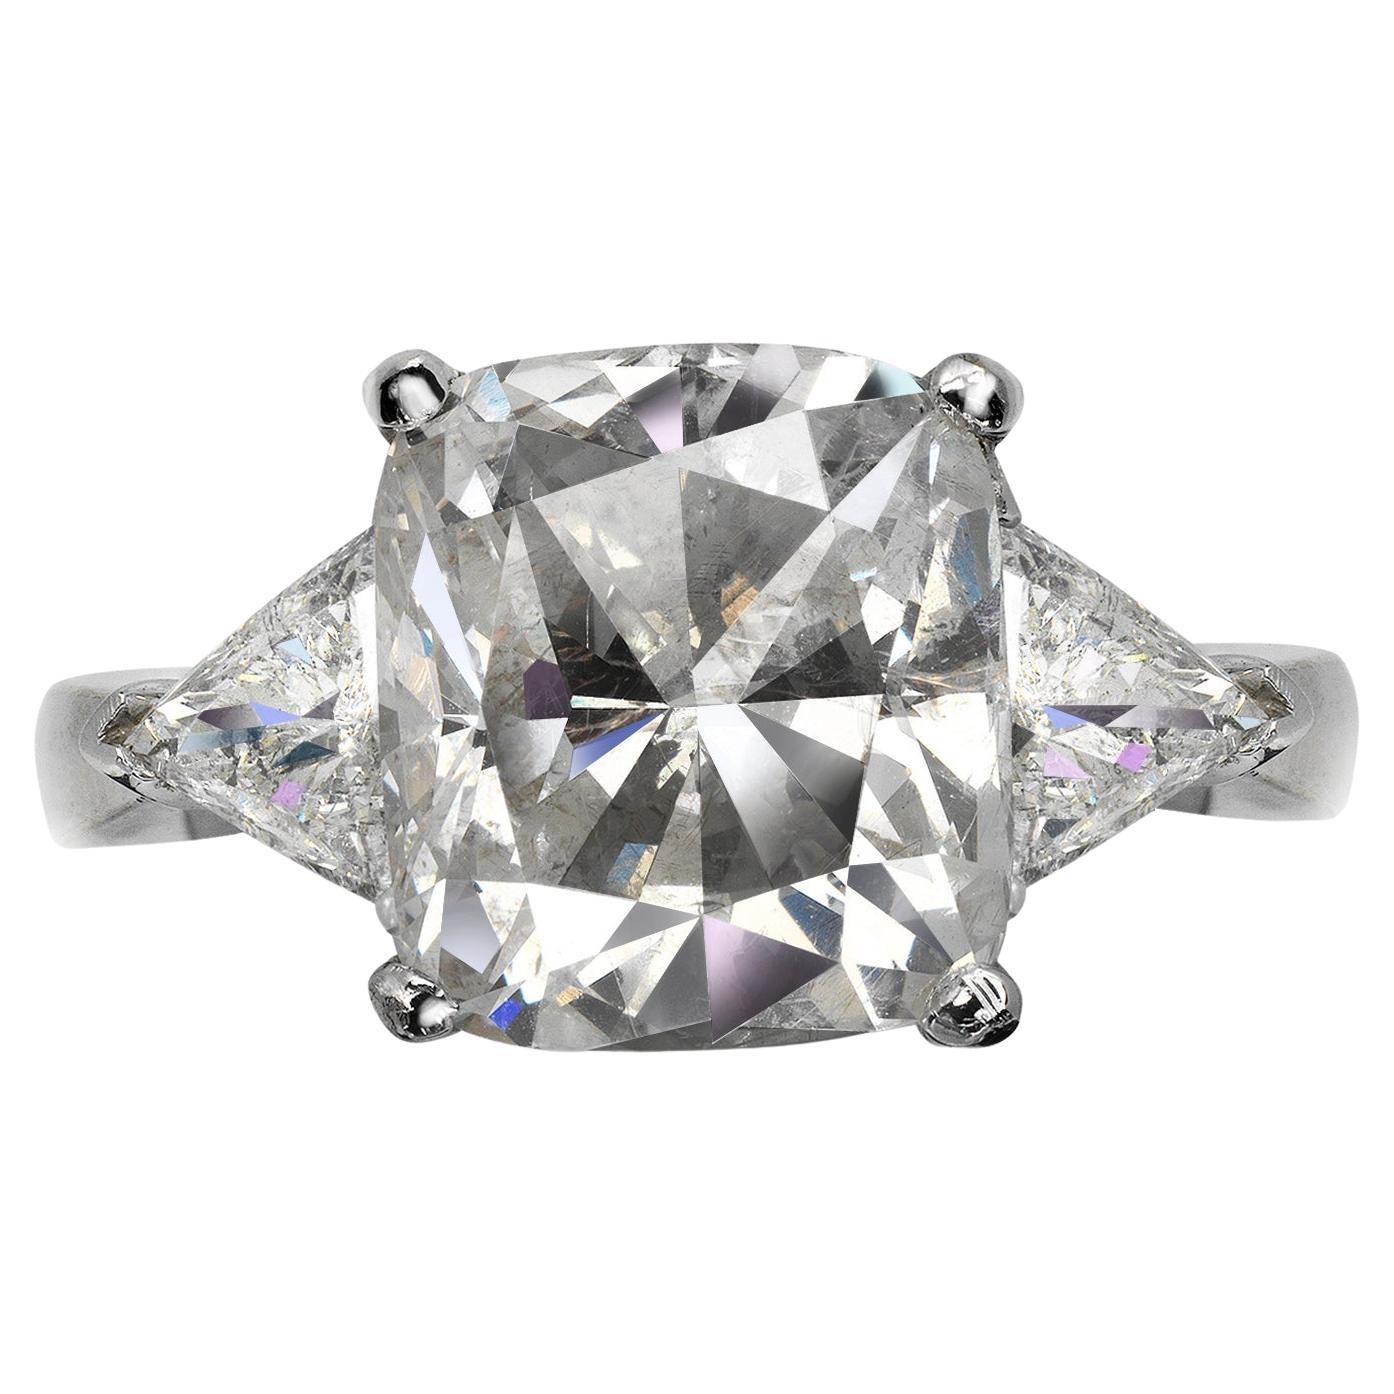 7 Carat Cushion Cut Diamond Engagement Ring Certified H SI1 For Sale